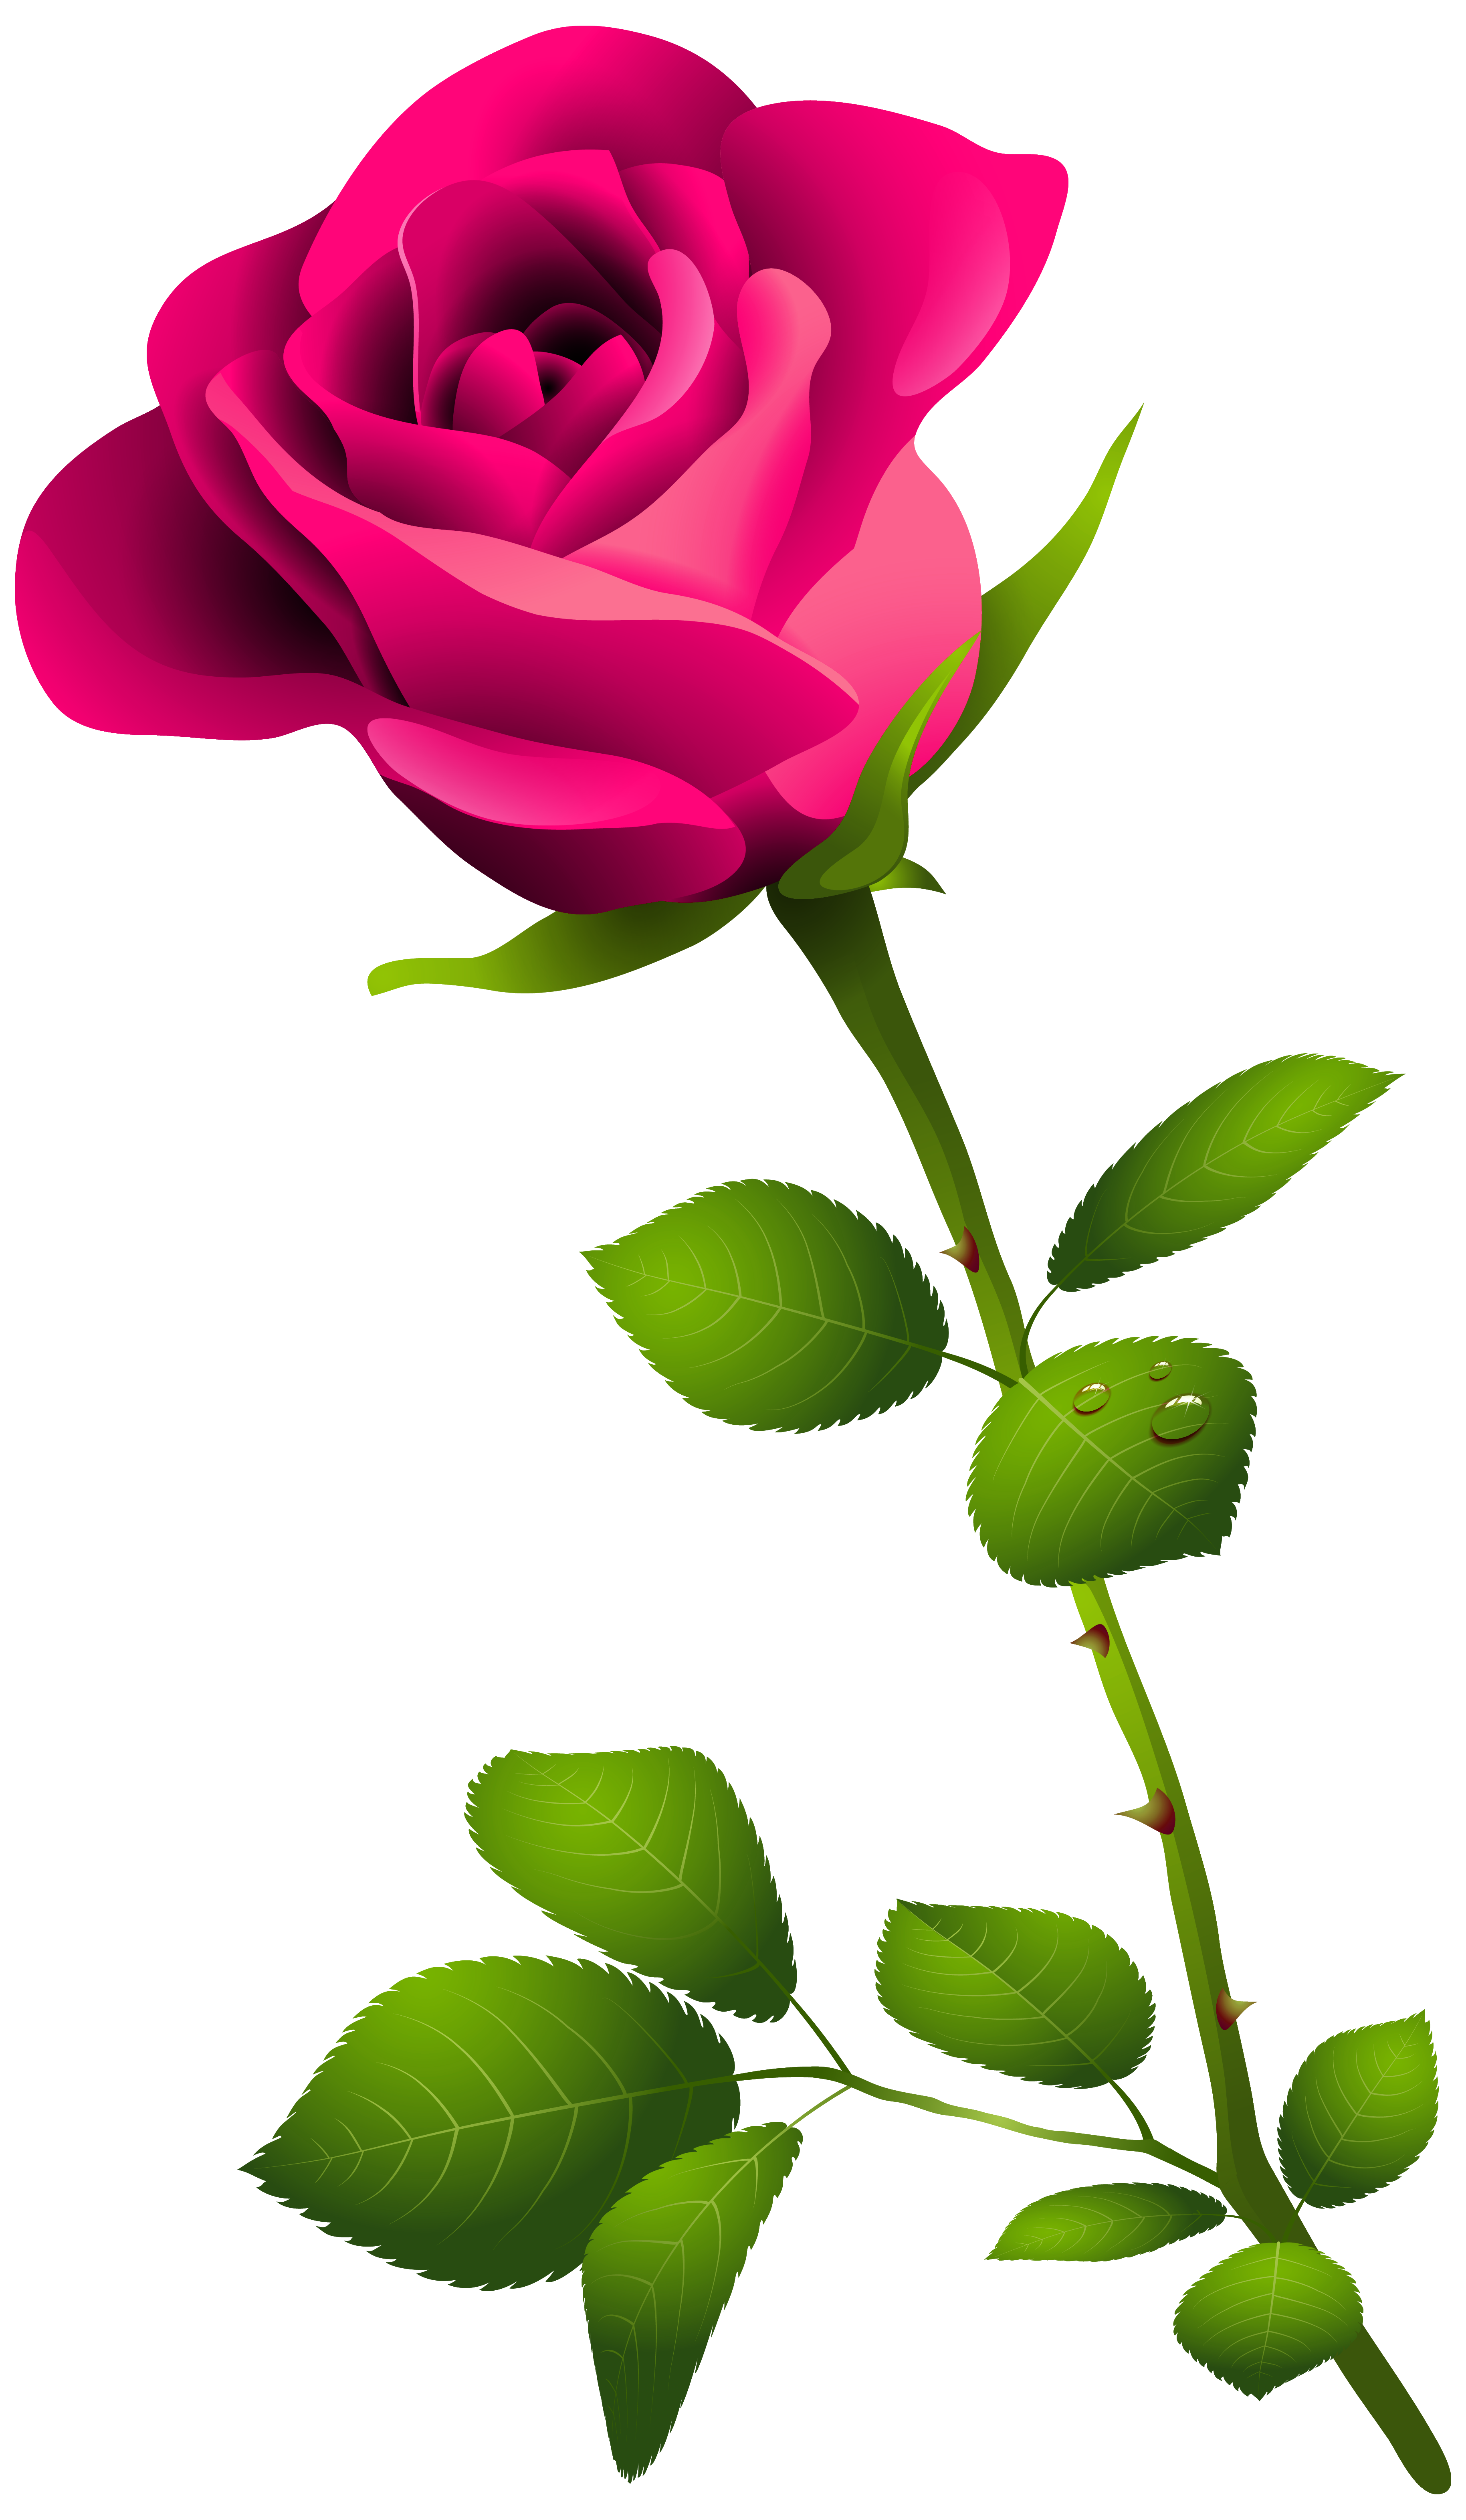 Pink rose with stem. Flowers clipart stems